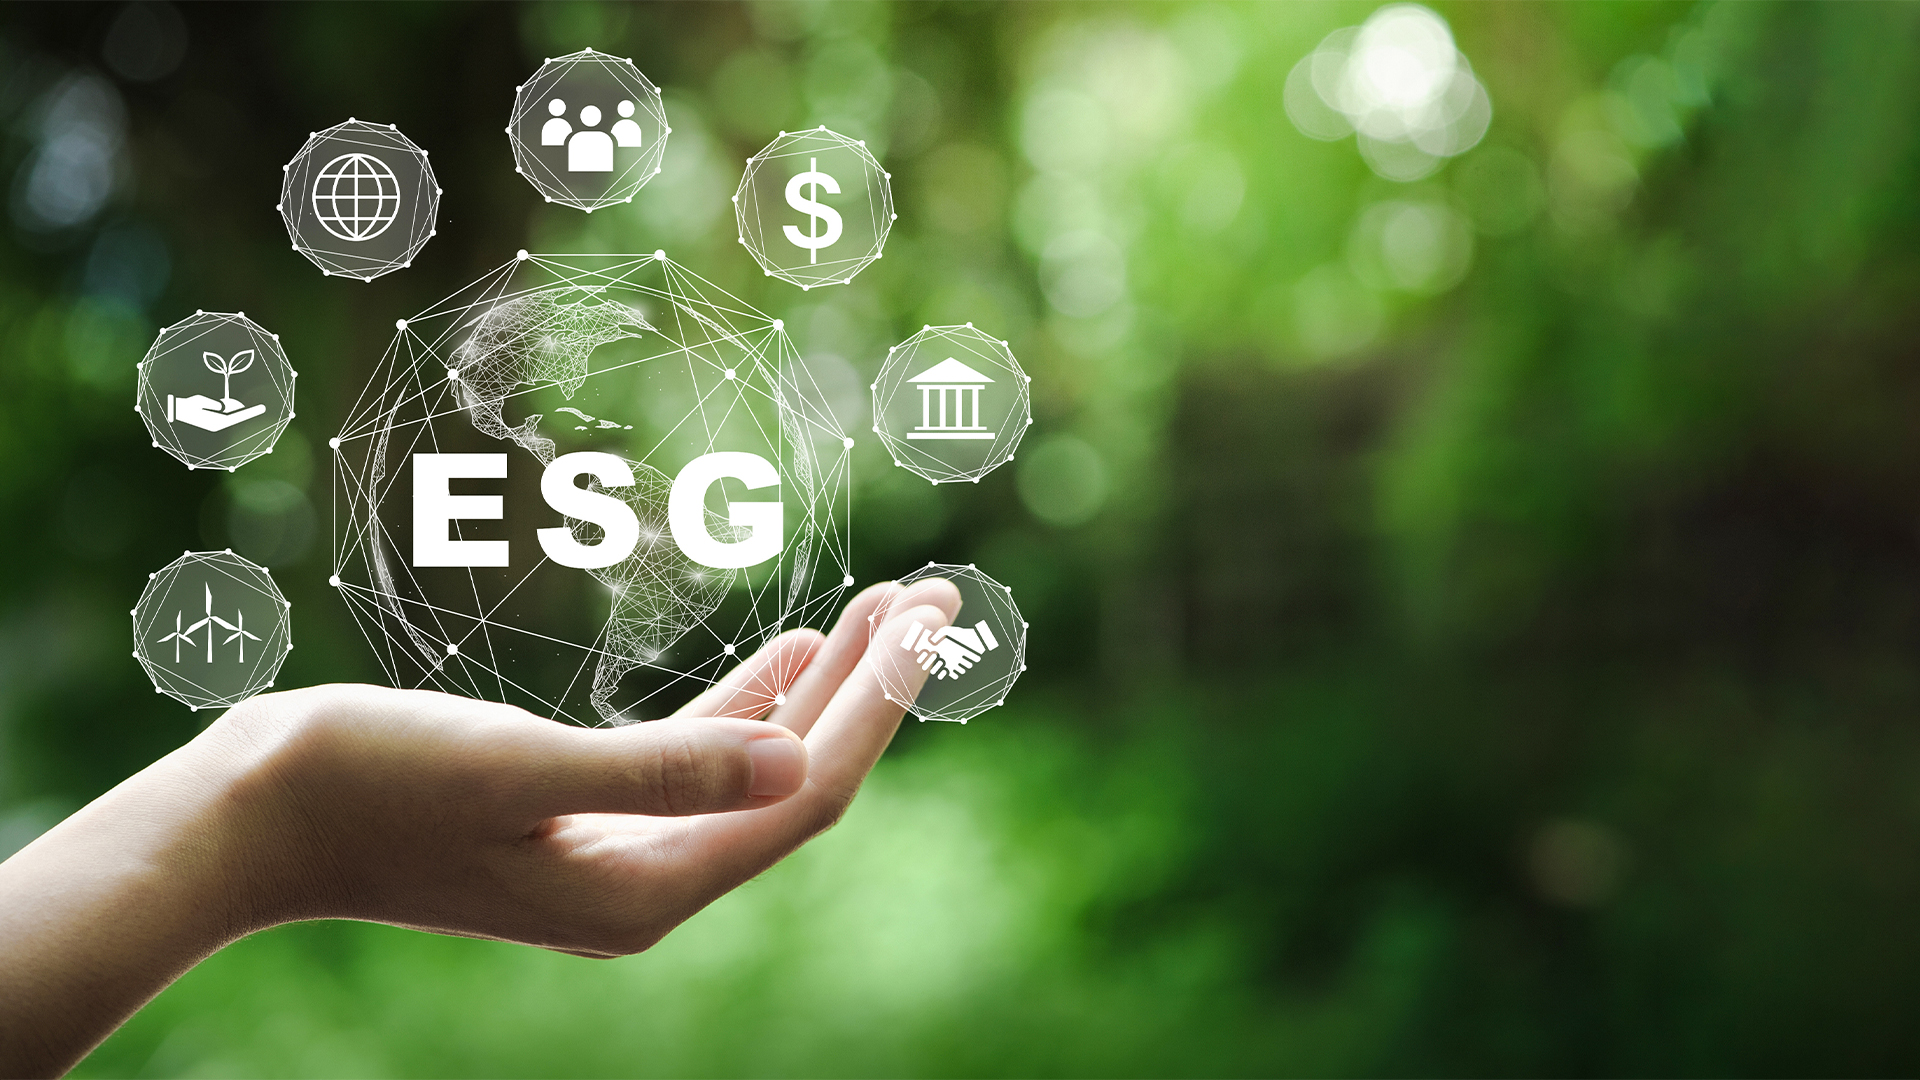 ESG icon concept in the hand for environmental, social, and governance in sustainable and ethical business